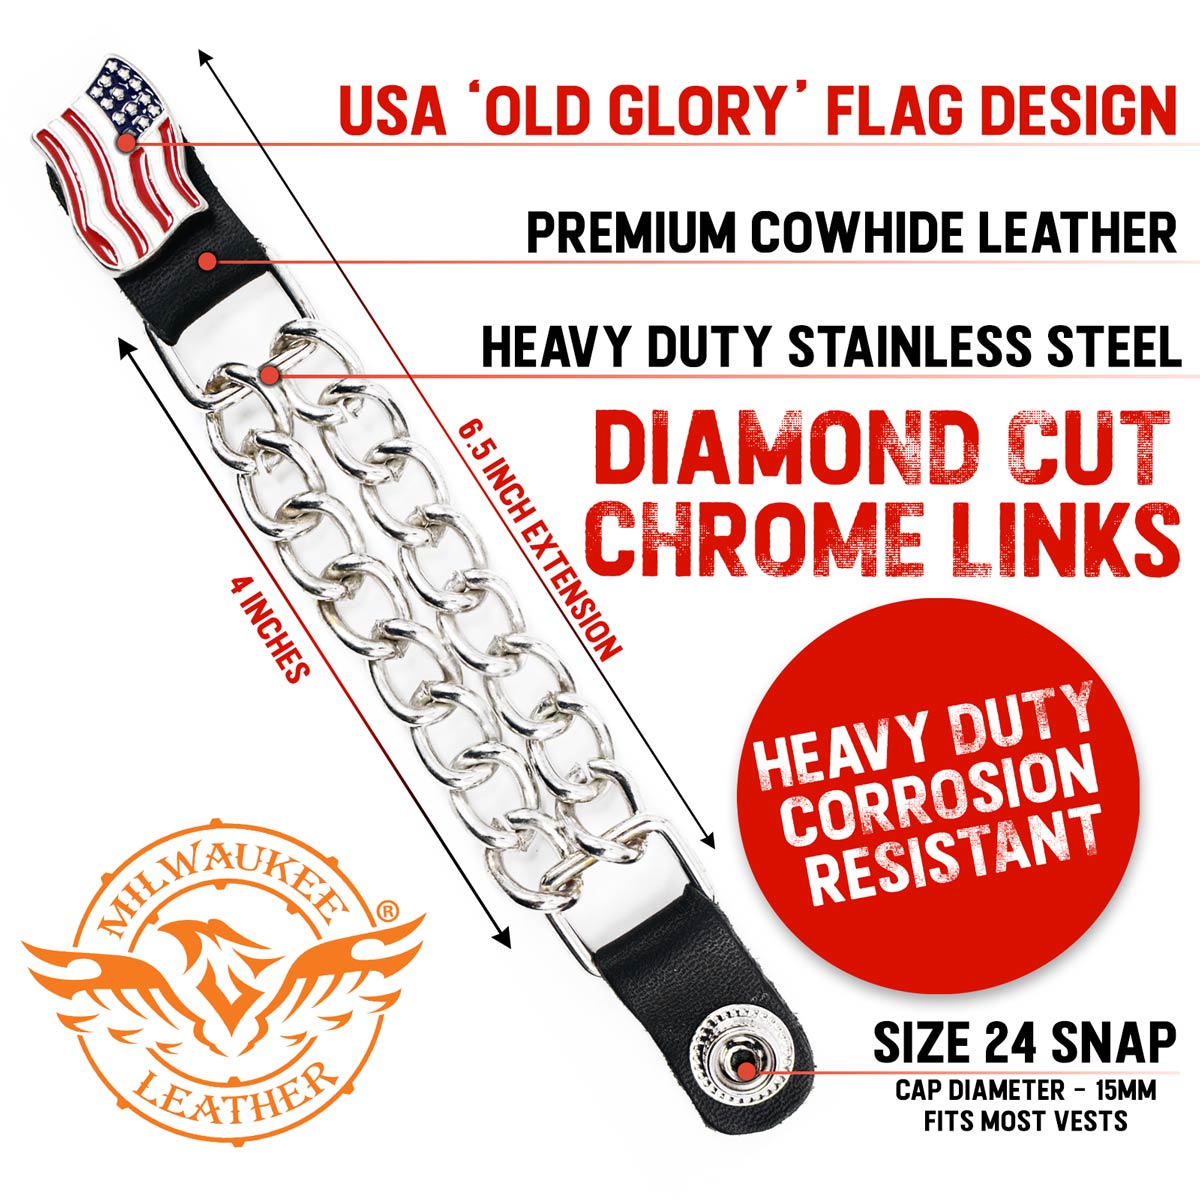 Milwaukee Leather American Flag Vest Extender - Double Chrome Chains Genuine Leather 6.5" Extension 4-PCS MLA6008SET